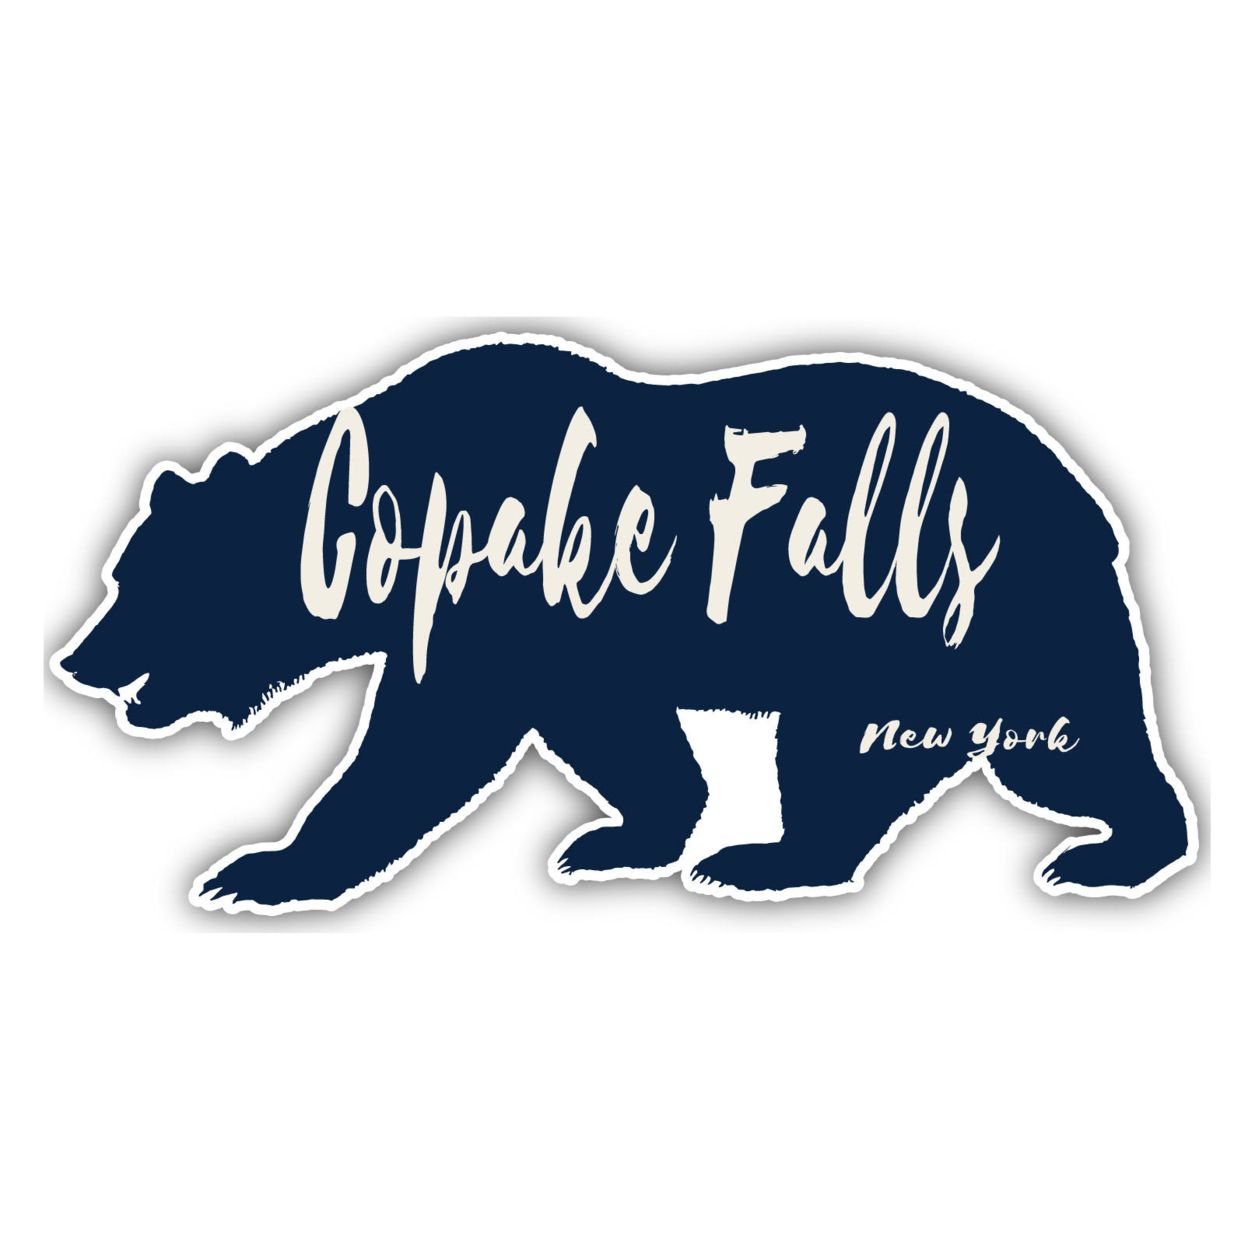 Copake Falls New York Souvenir Decorative Stickers (Choose Theme And Size) - 4-Pack, 4-Inch, Bear